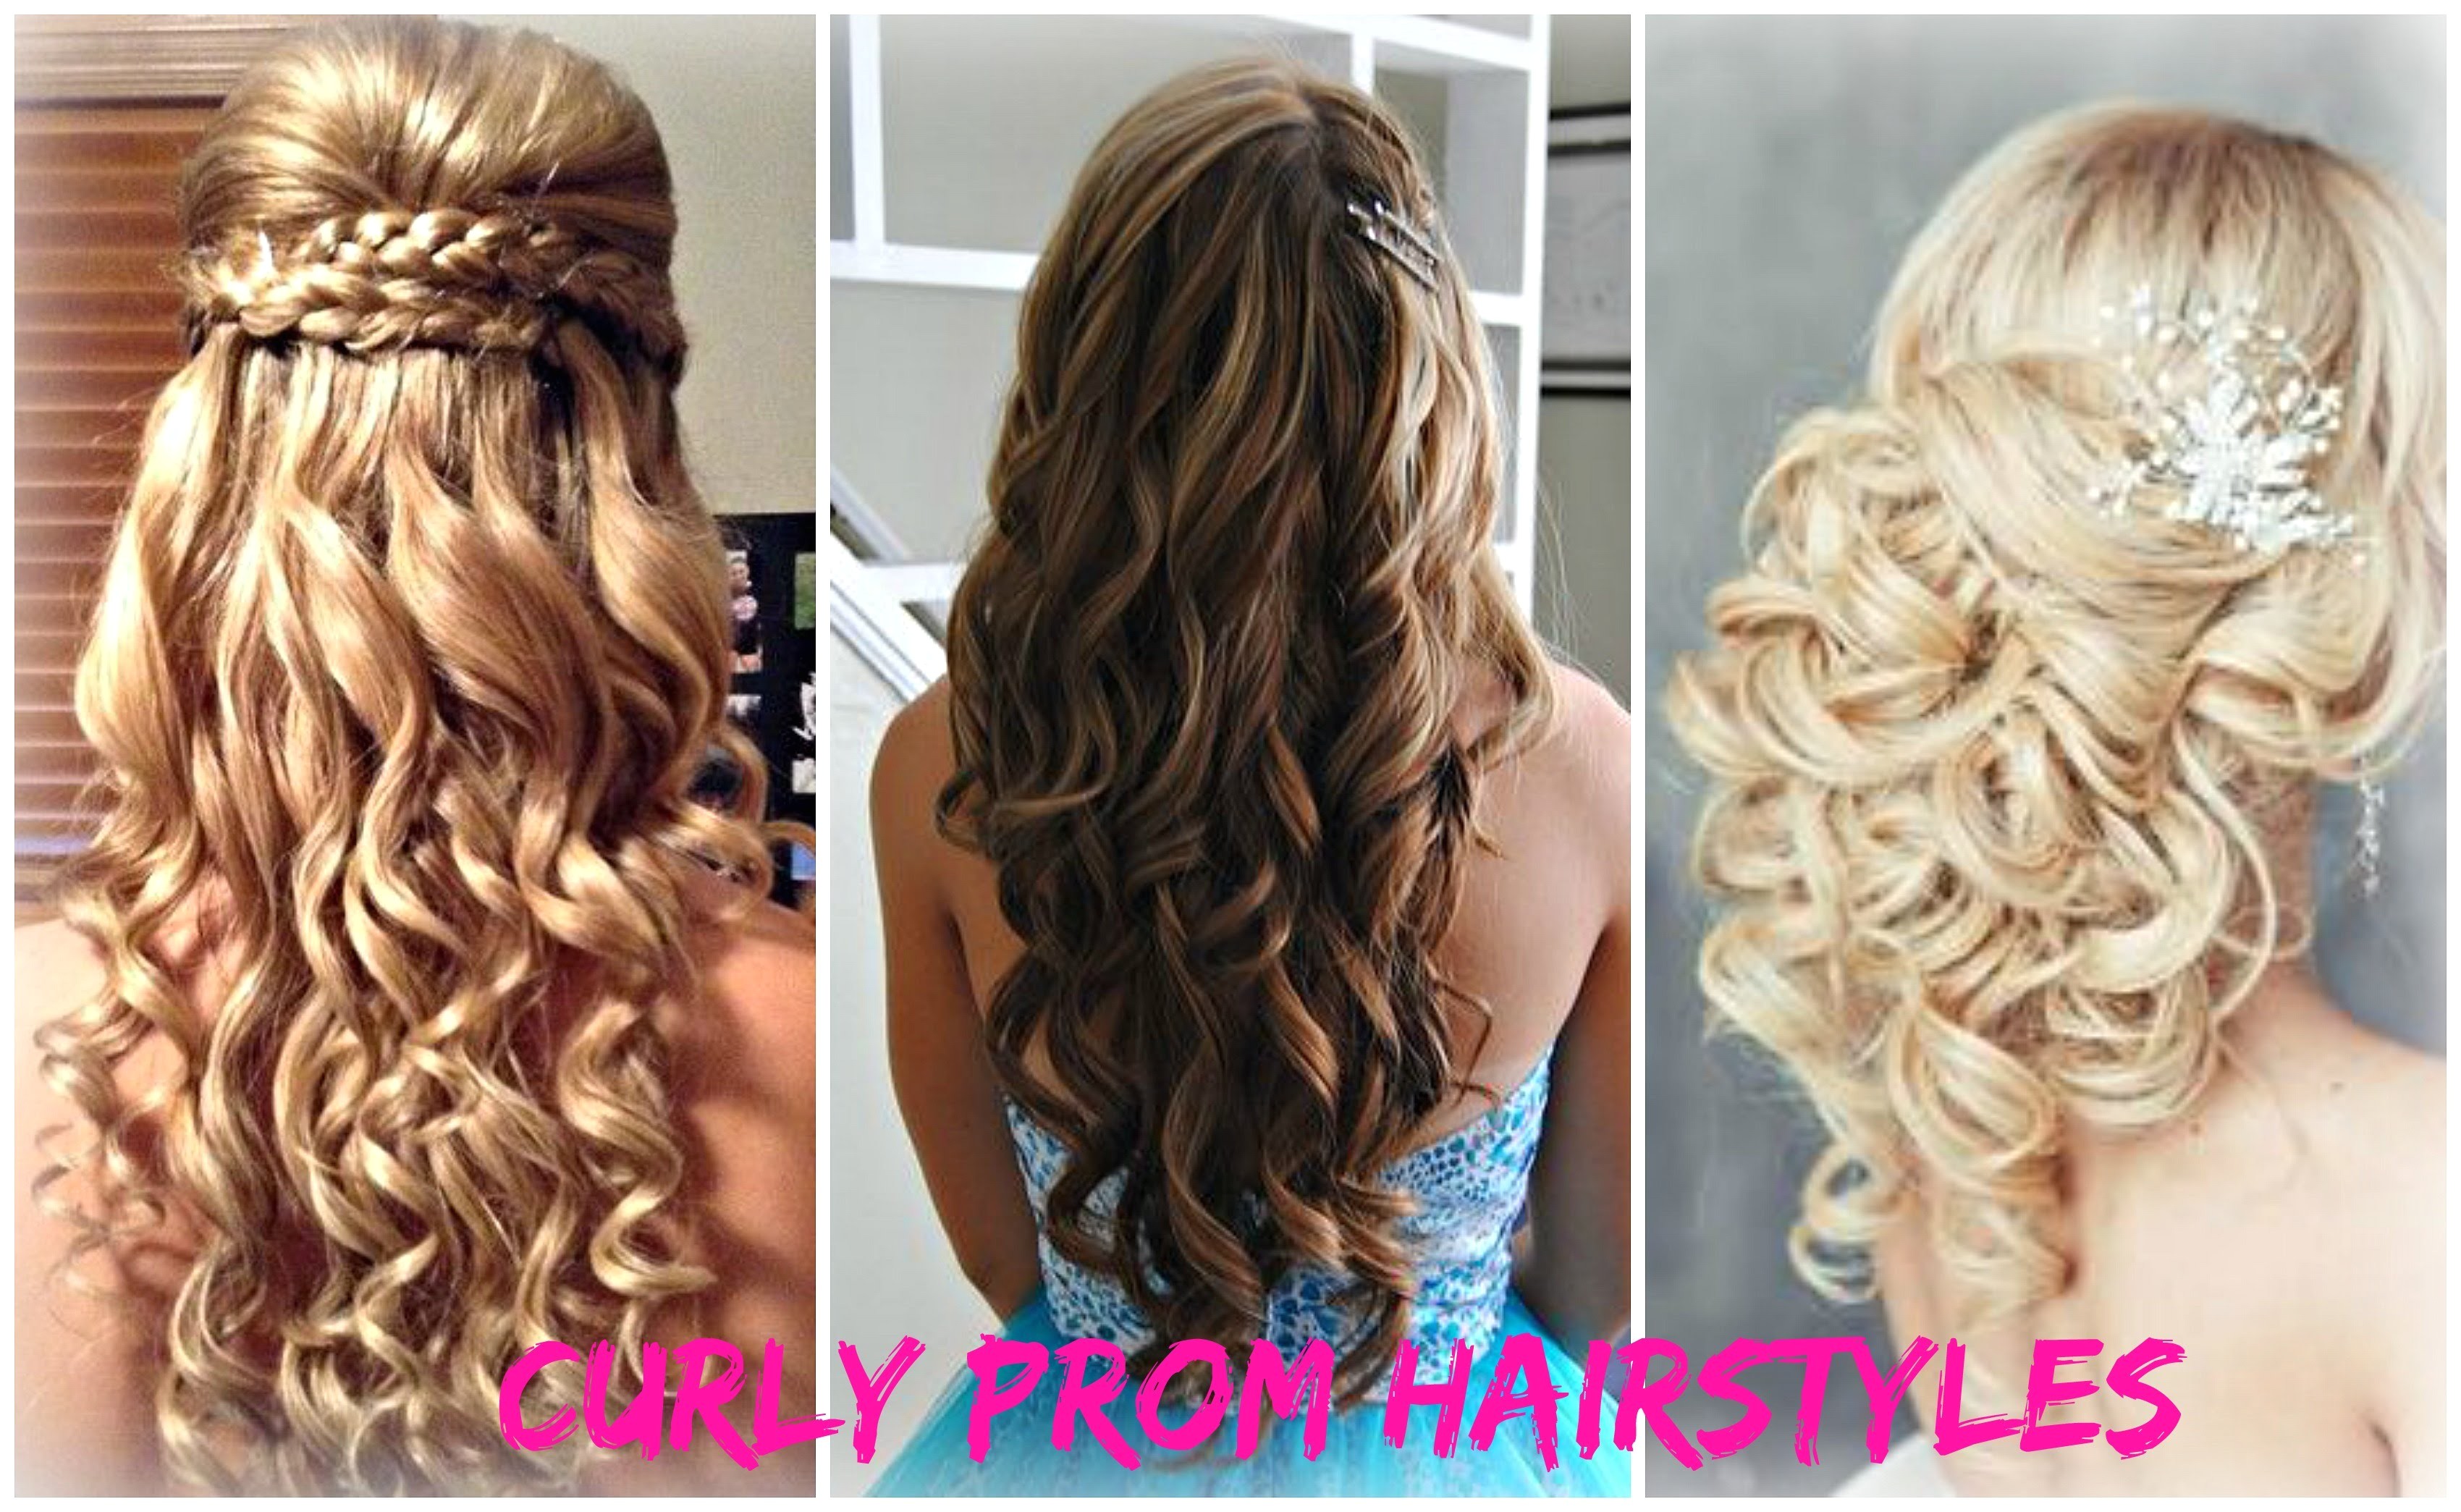 Curly hairstyles for prom and inspired to create a prom hairstyles of your dreams 1